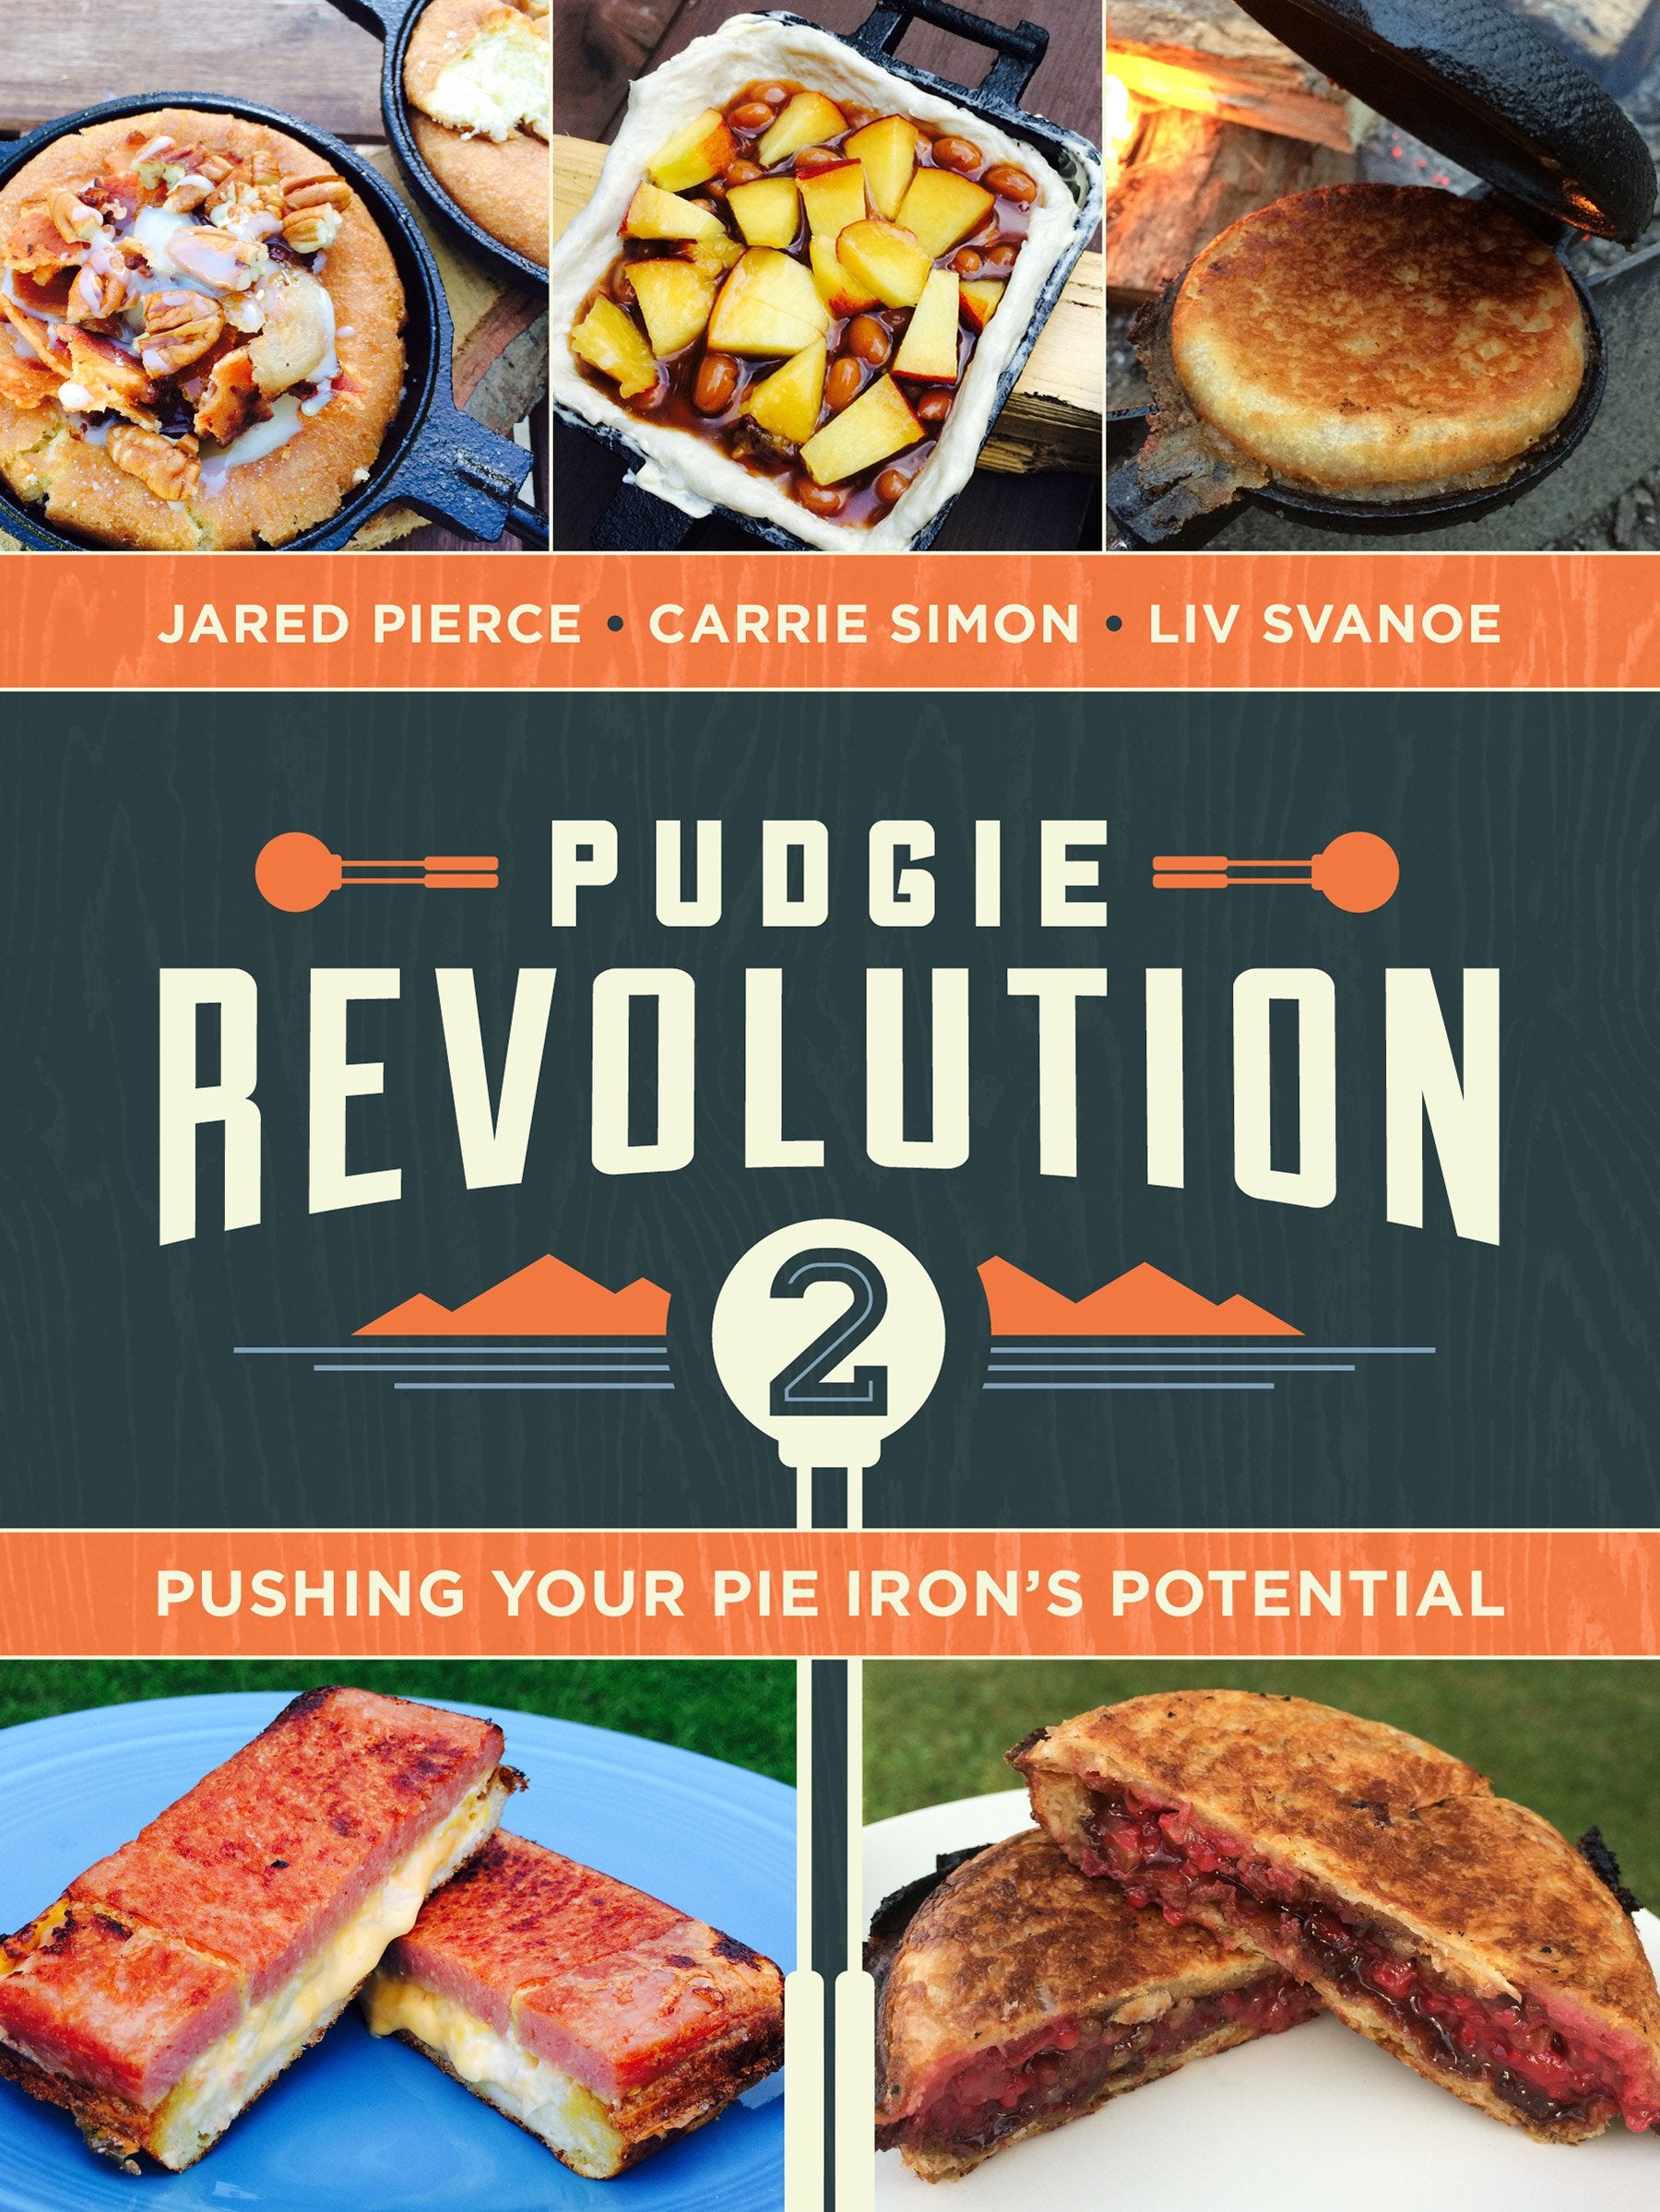 Pudgie Revolution 2 - Pushing Your Pie Iron's Potential Book, Rome Industries #2010